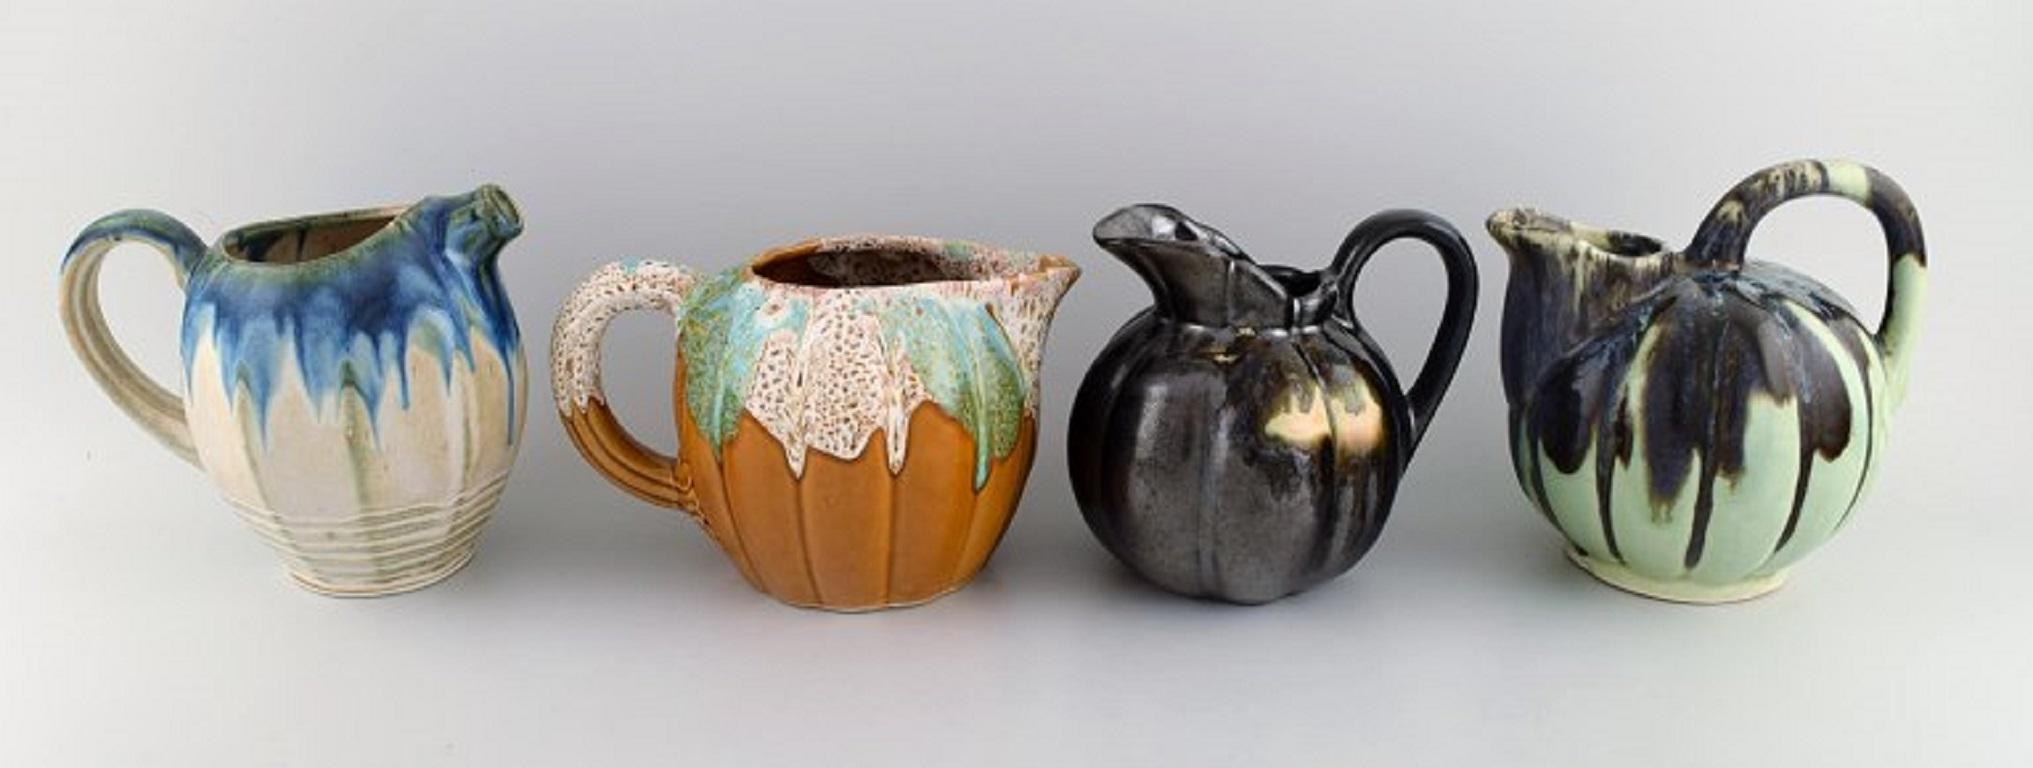 Four retro jugs in glazed ceramics. Beautiful glazes and shapes, Belgium, 1960s-1970s.
Largest measures: 18.5 x 17 cm.
In excellent condition.
Stamped.